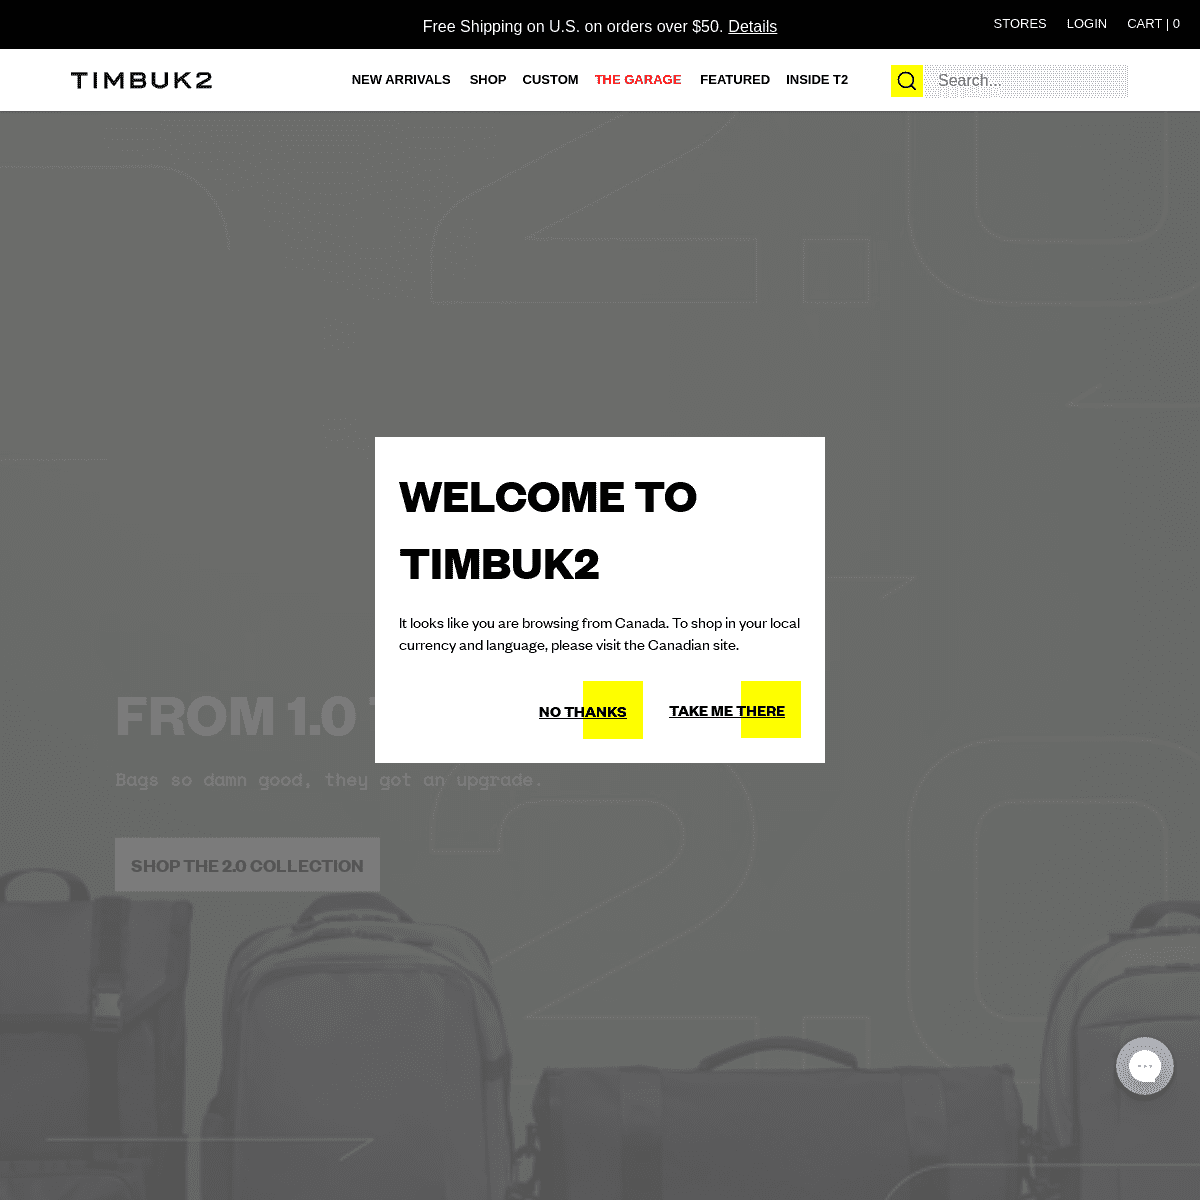 A complete backup of https://timbuk2.com